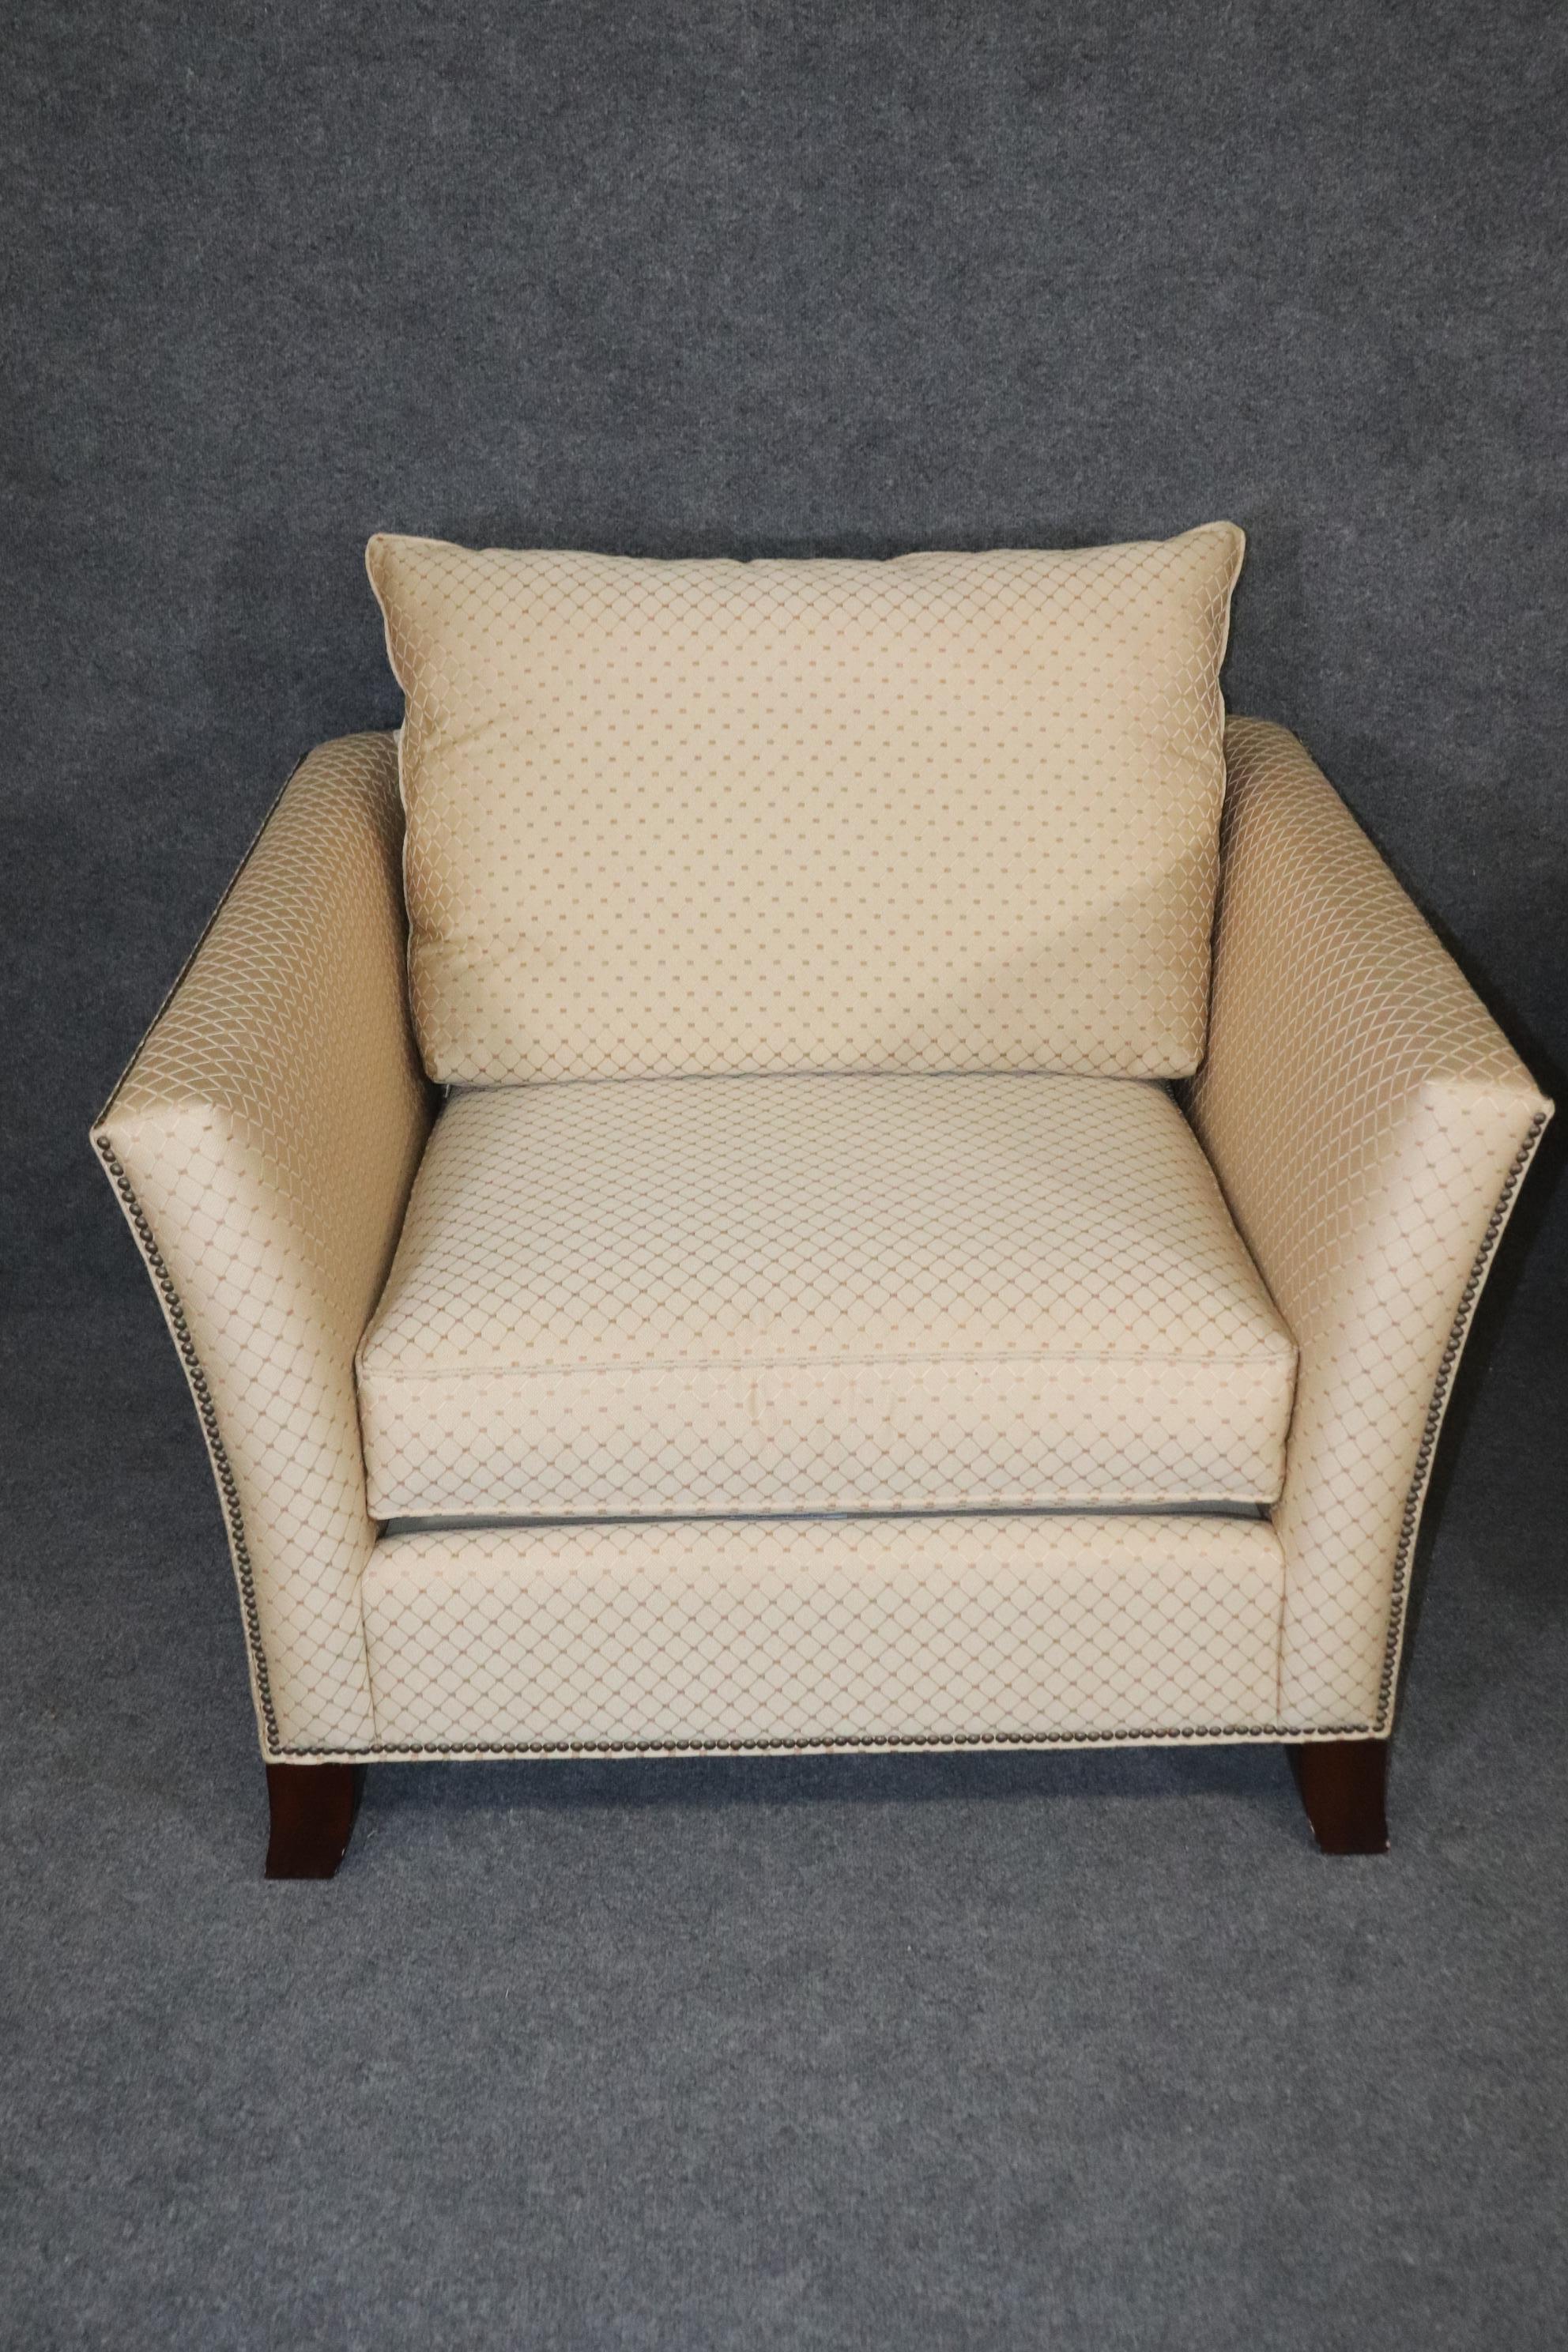 Upholstery Pair of Cream Upholstered Oversized Even-Arm Contemporary Club Bergere Chairs